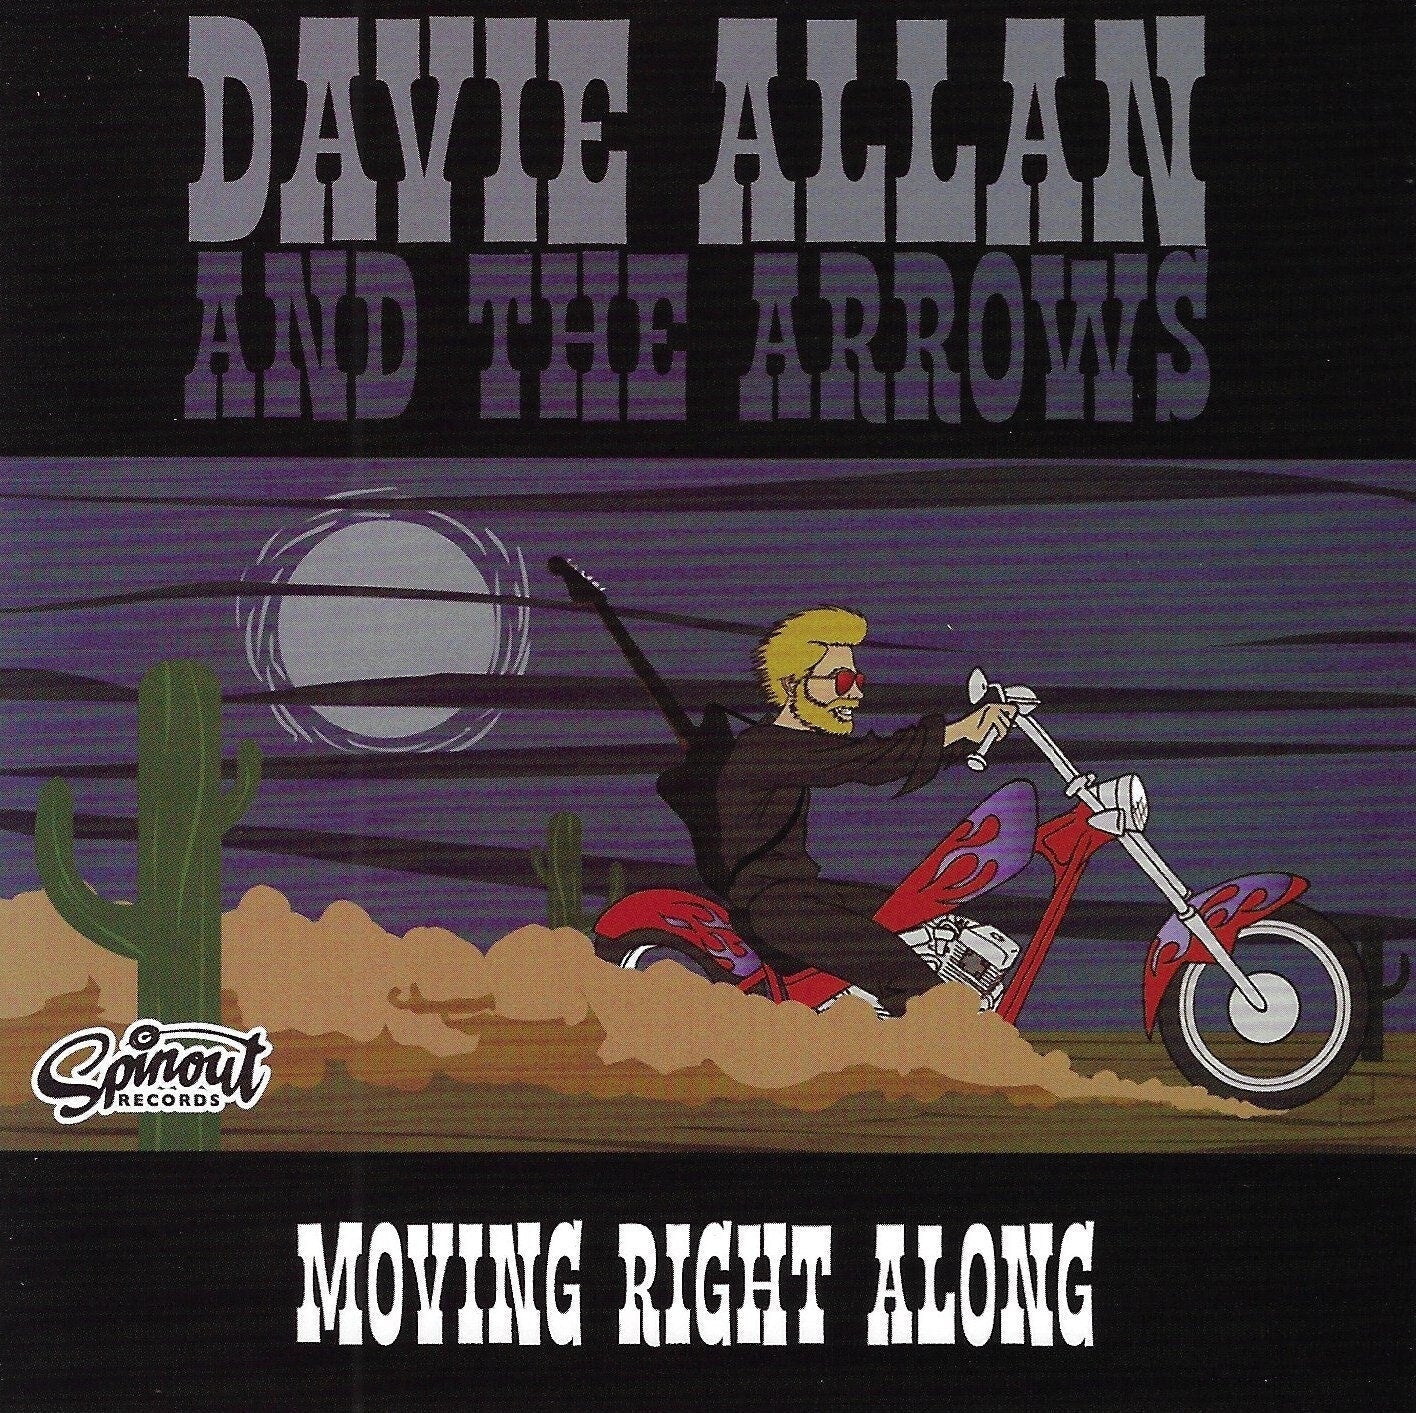 Davie Allan and The Arrows "Moving Right Along" CD